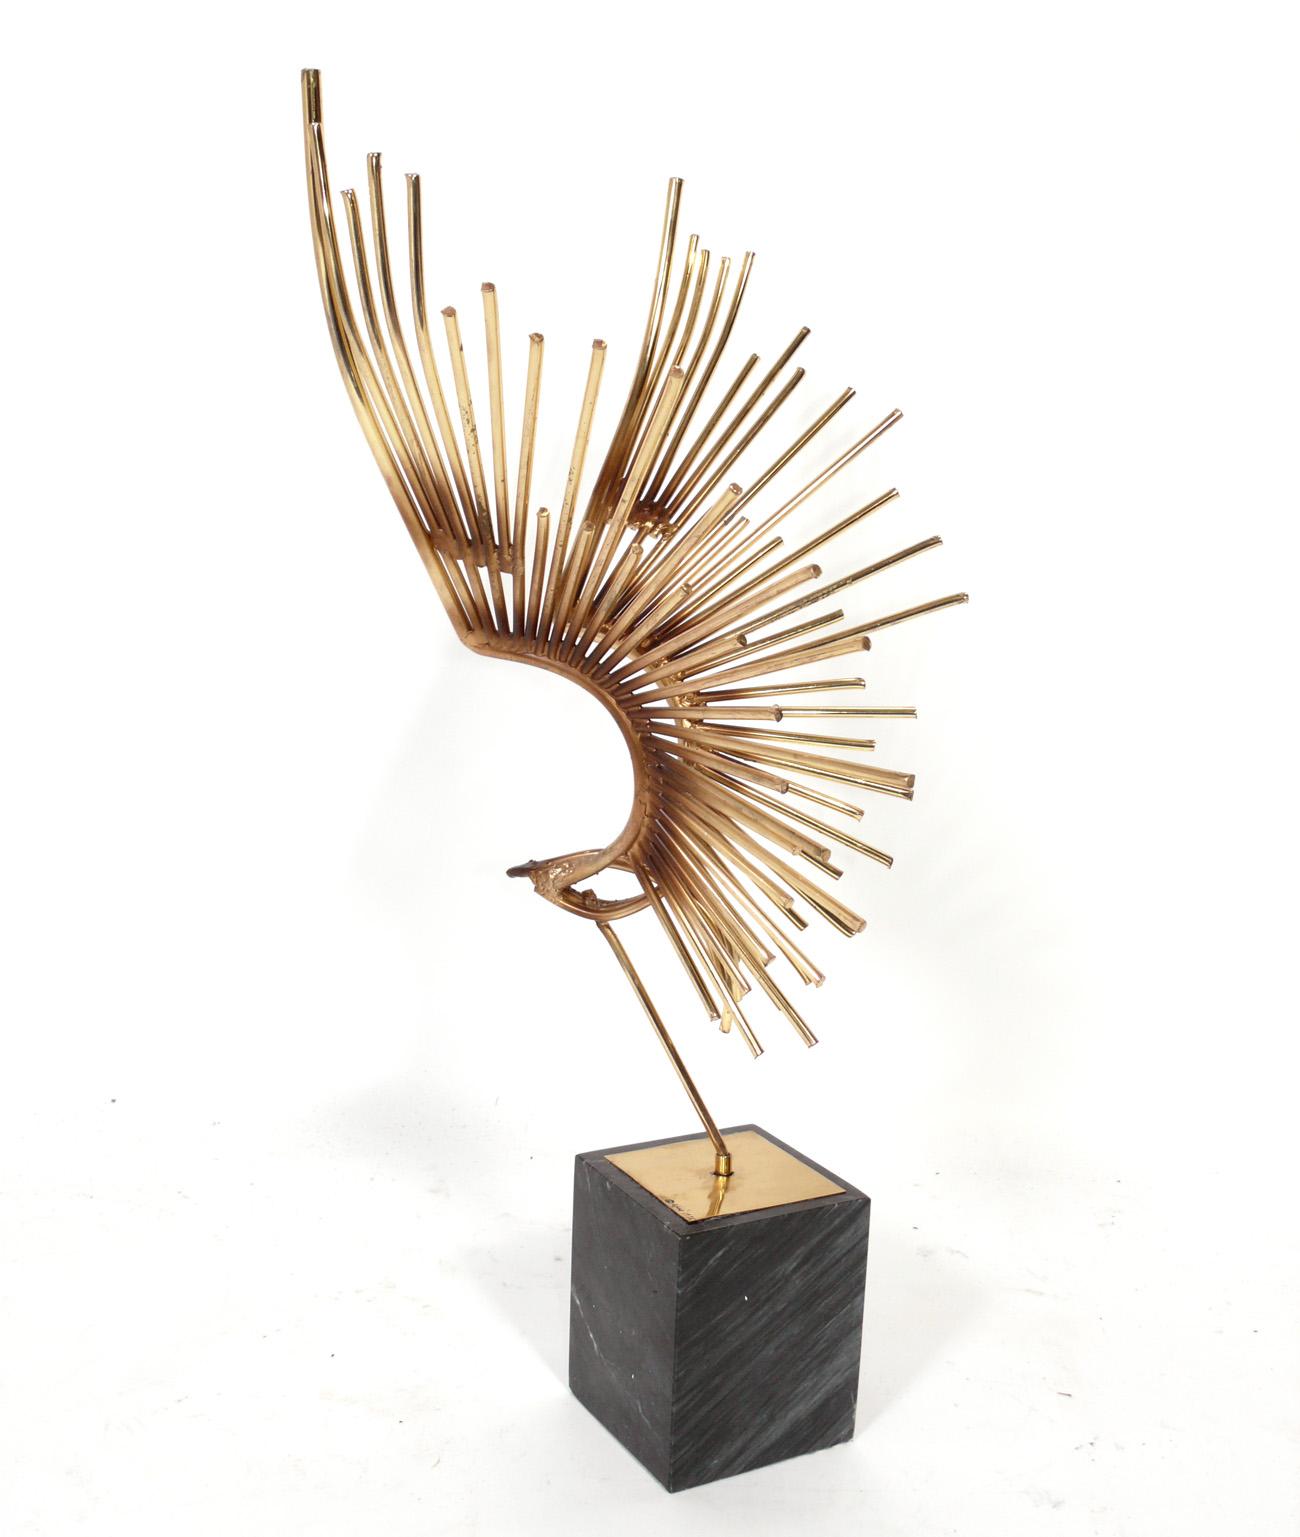 Modernist brass eagle or bird in flight sculpture, by C. Jere, American, circa 1970s. Signed and dated at base, see detail photo. It measures an impressive 29